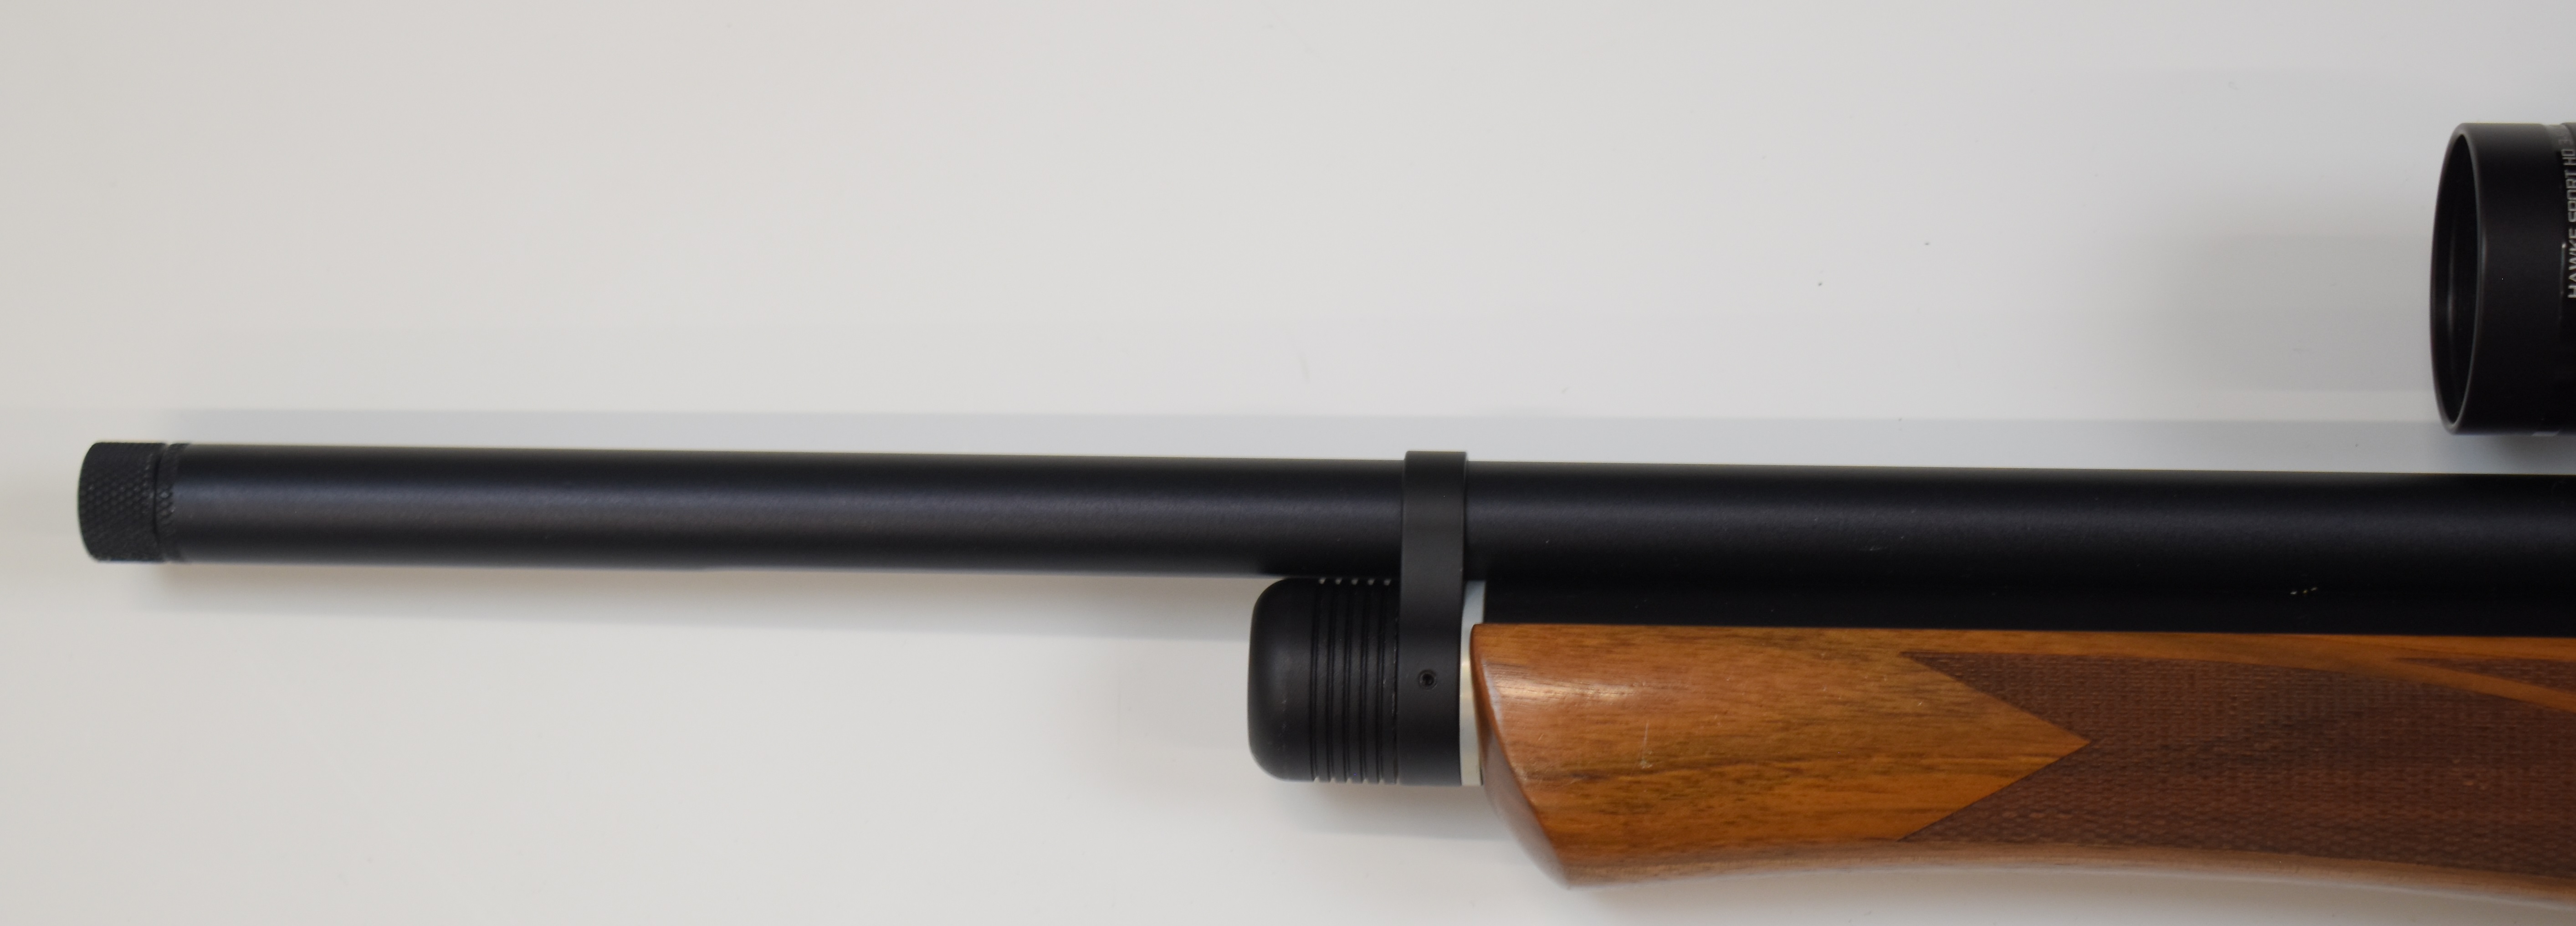 Daystate Huntsman Classic .177 PCP air rifle with monogrammed and chequered semi-pistol grip, - Image 9 of 9